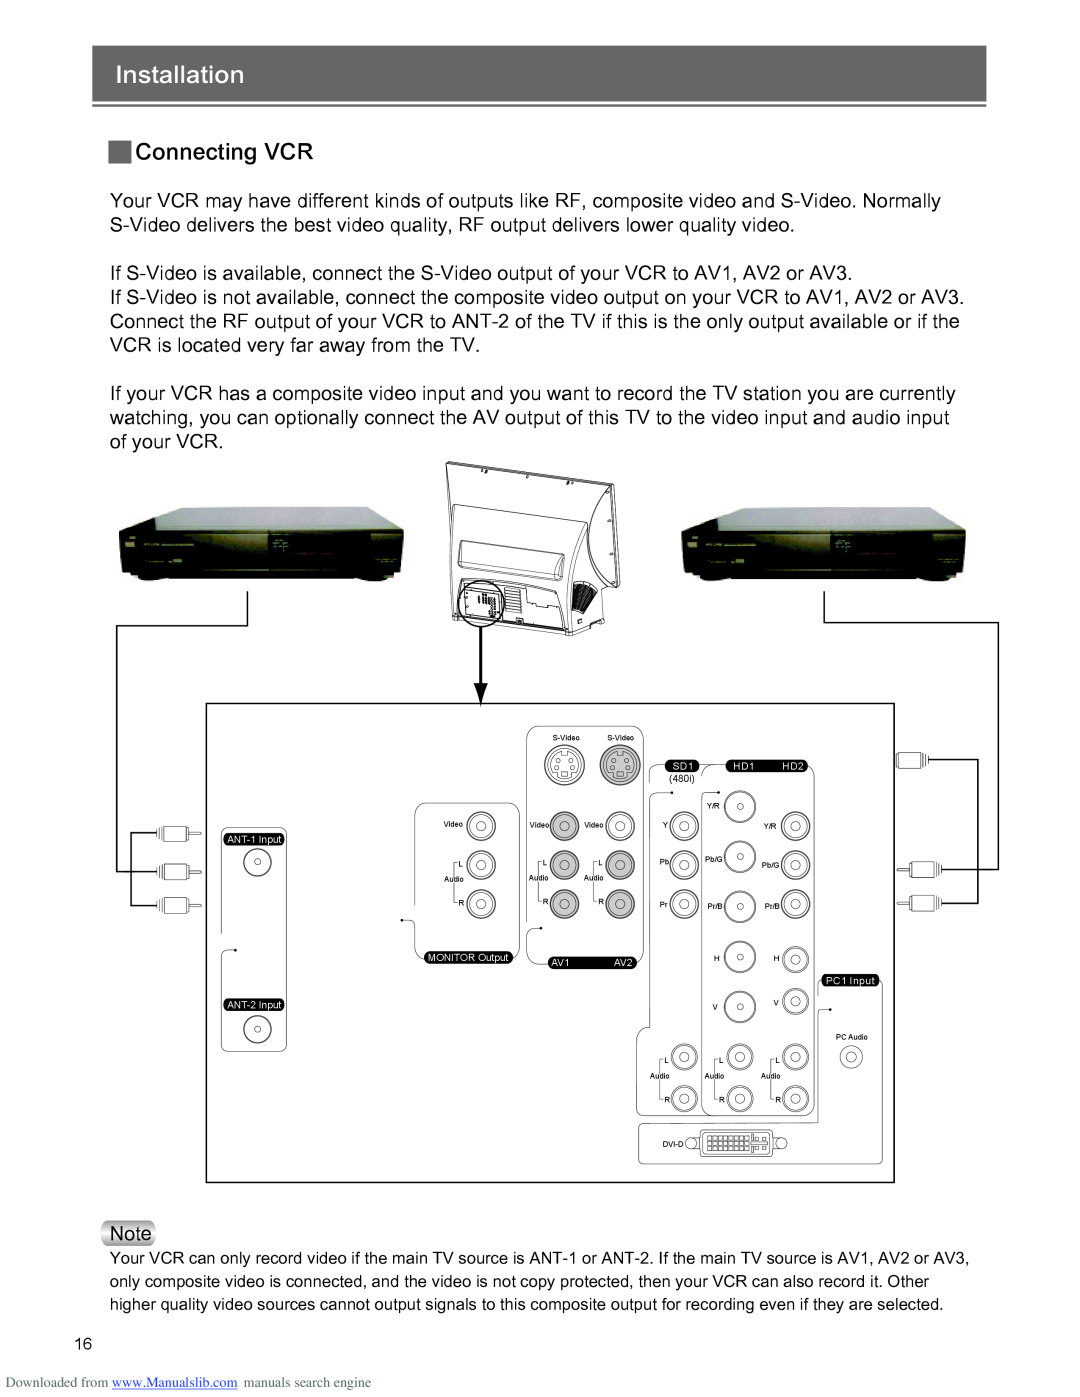 Optoma Technology RD65 manual Installation, Connecting VCR 